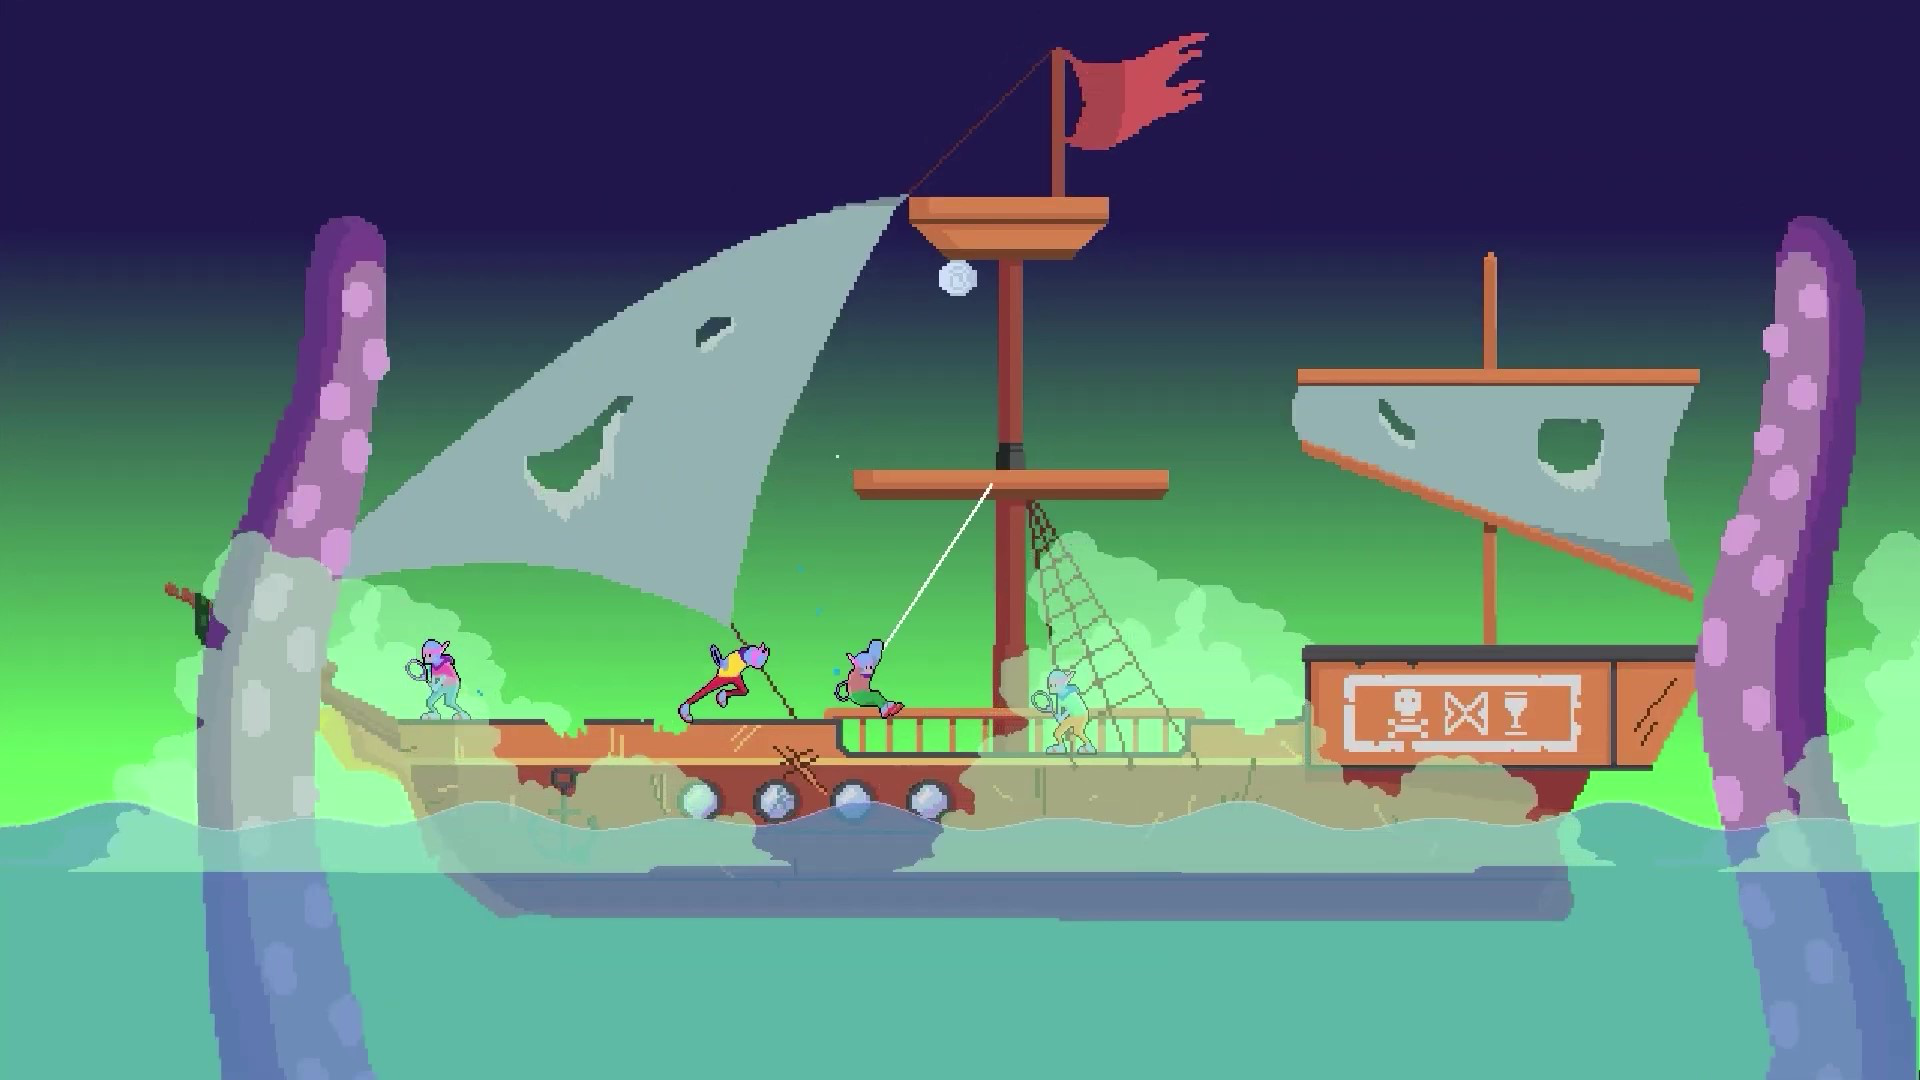 A 2D fighting game on a pirate ship